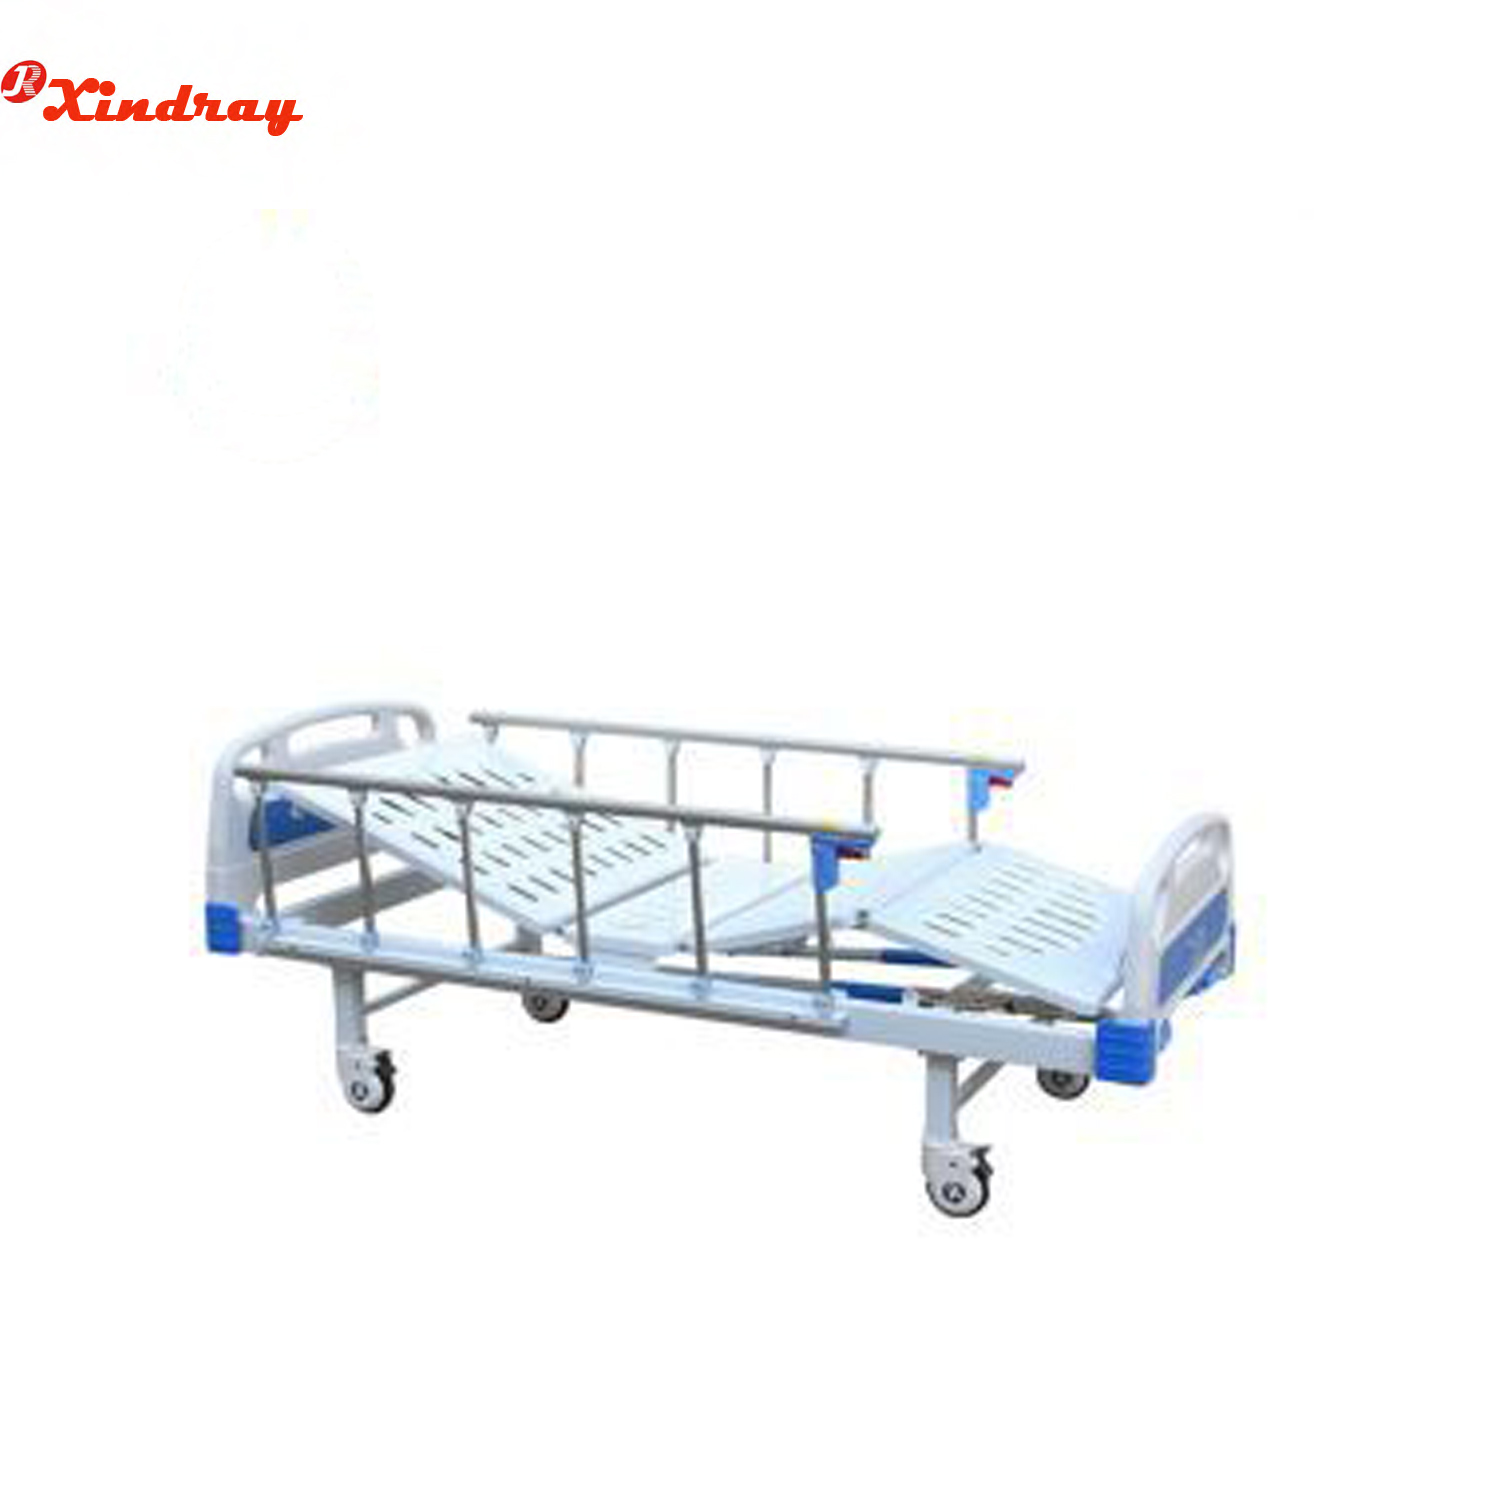 Two Function Manual Dialysis Bed